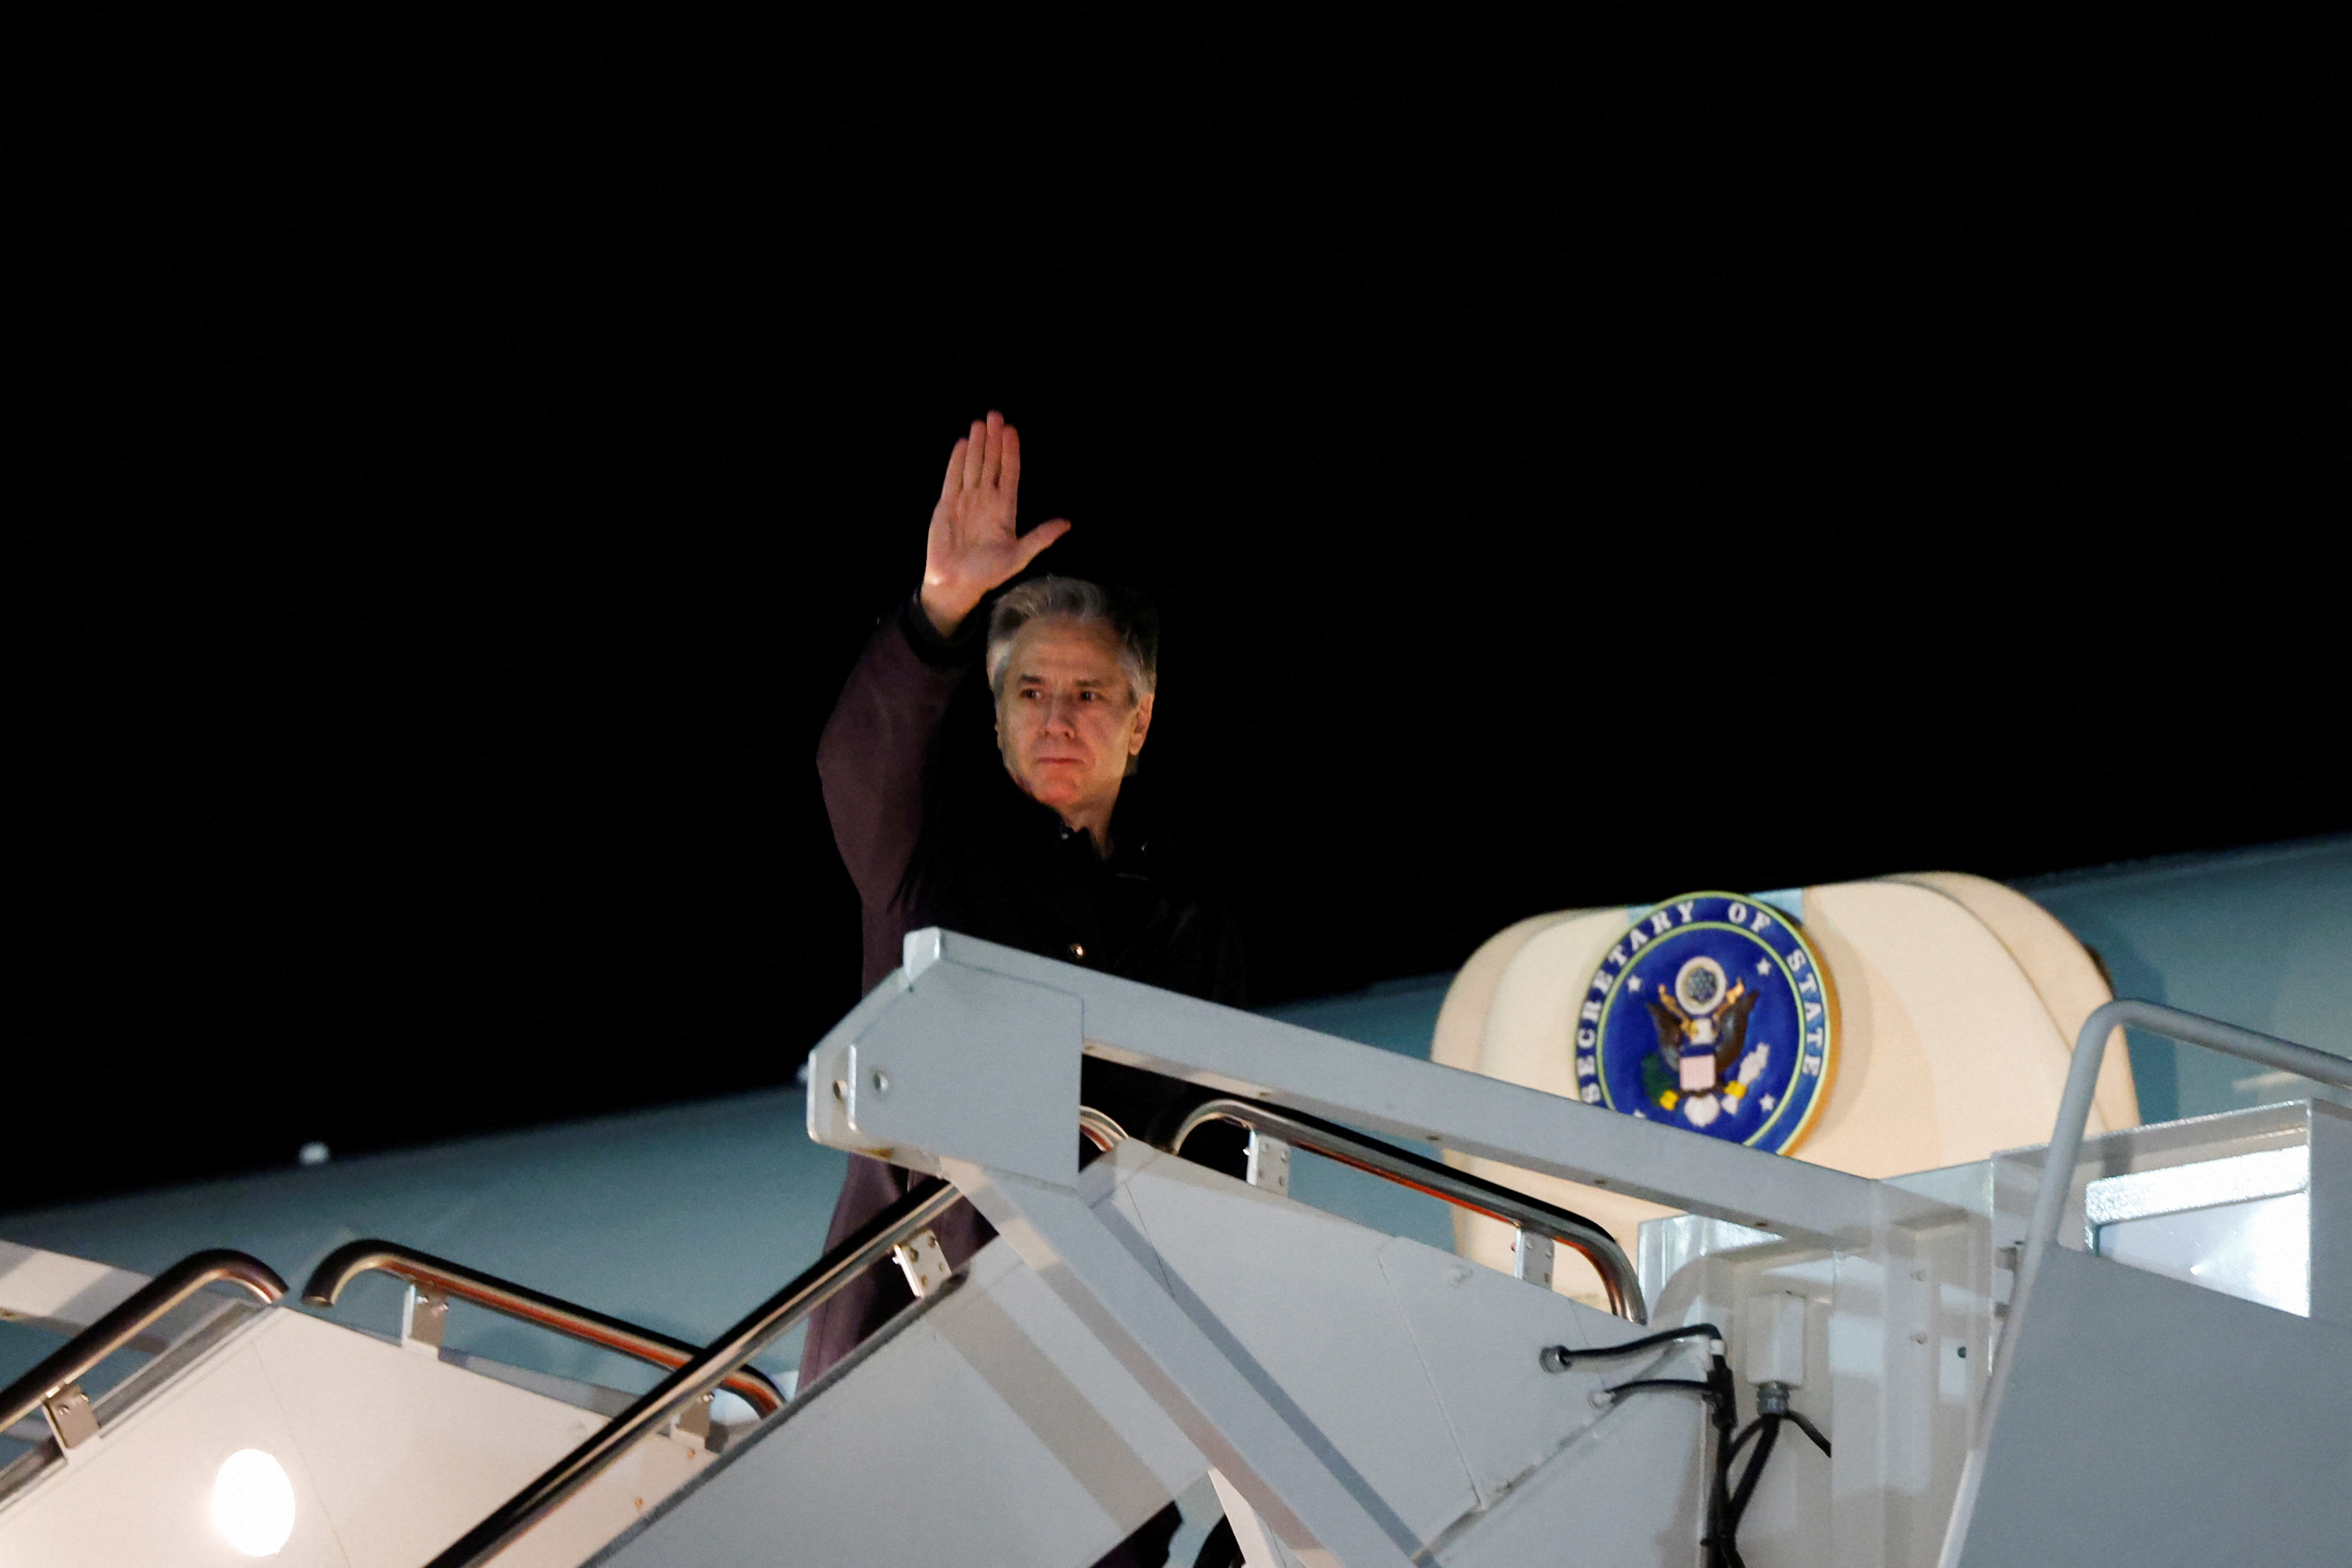 U.S. Secretary of State Antony Blinken waves as he boards an aircraft during his departure from Washington to travel to the Middle East at Joint Base Andrews, Maryland, U.S., on January 4.